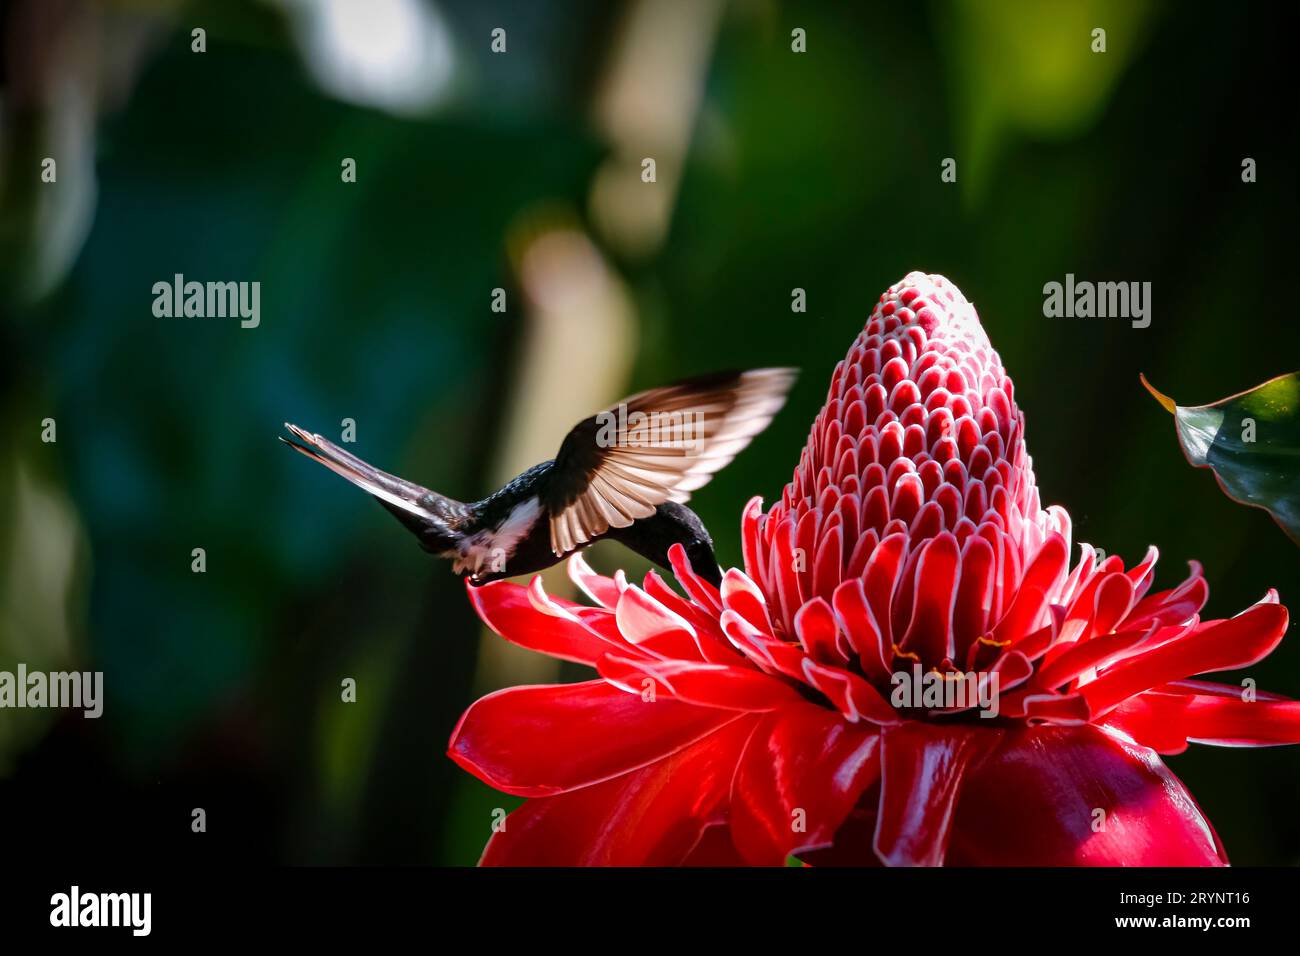 Black Jacobin sucking nectar from a red torch lily, flapping spread wings, in sunlight, Folha Seca, Stock Photo